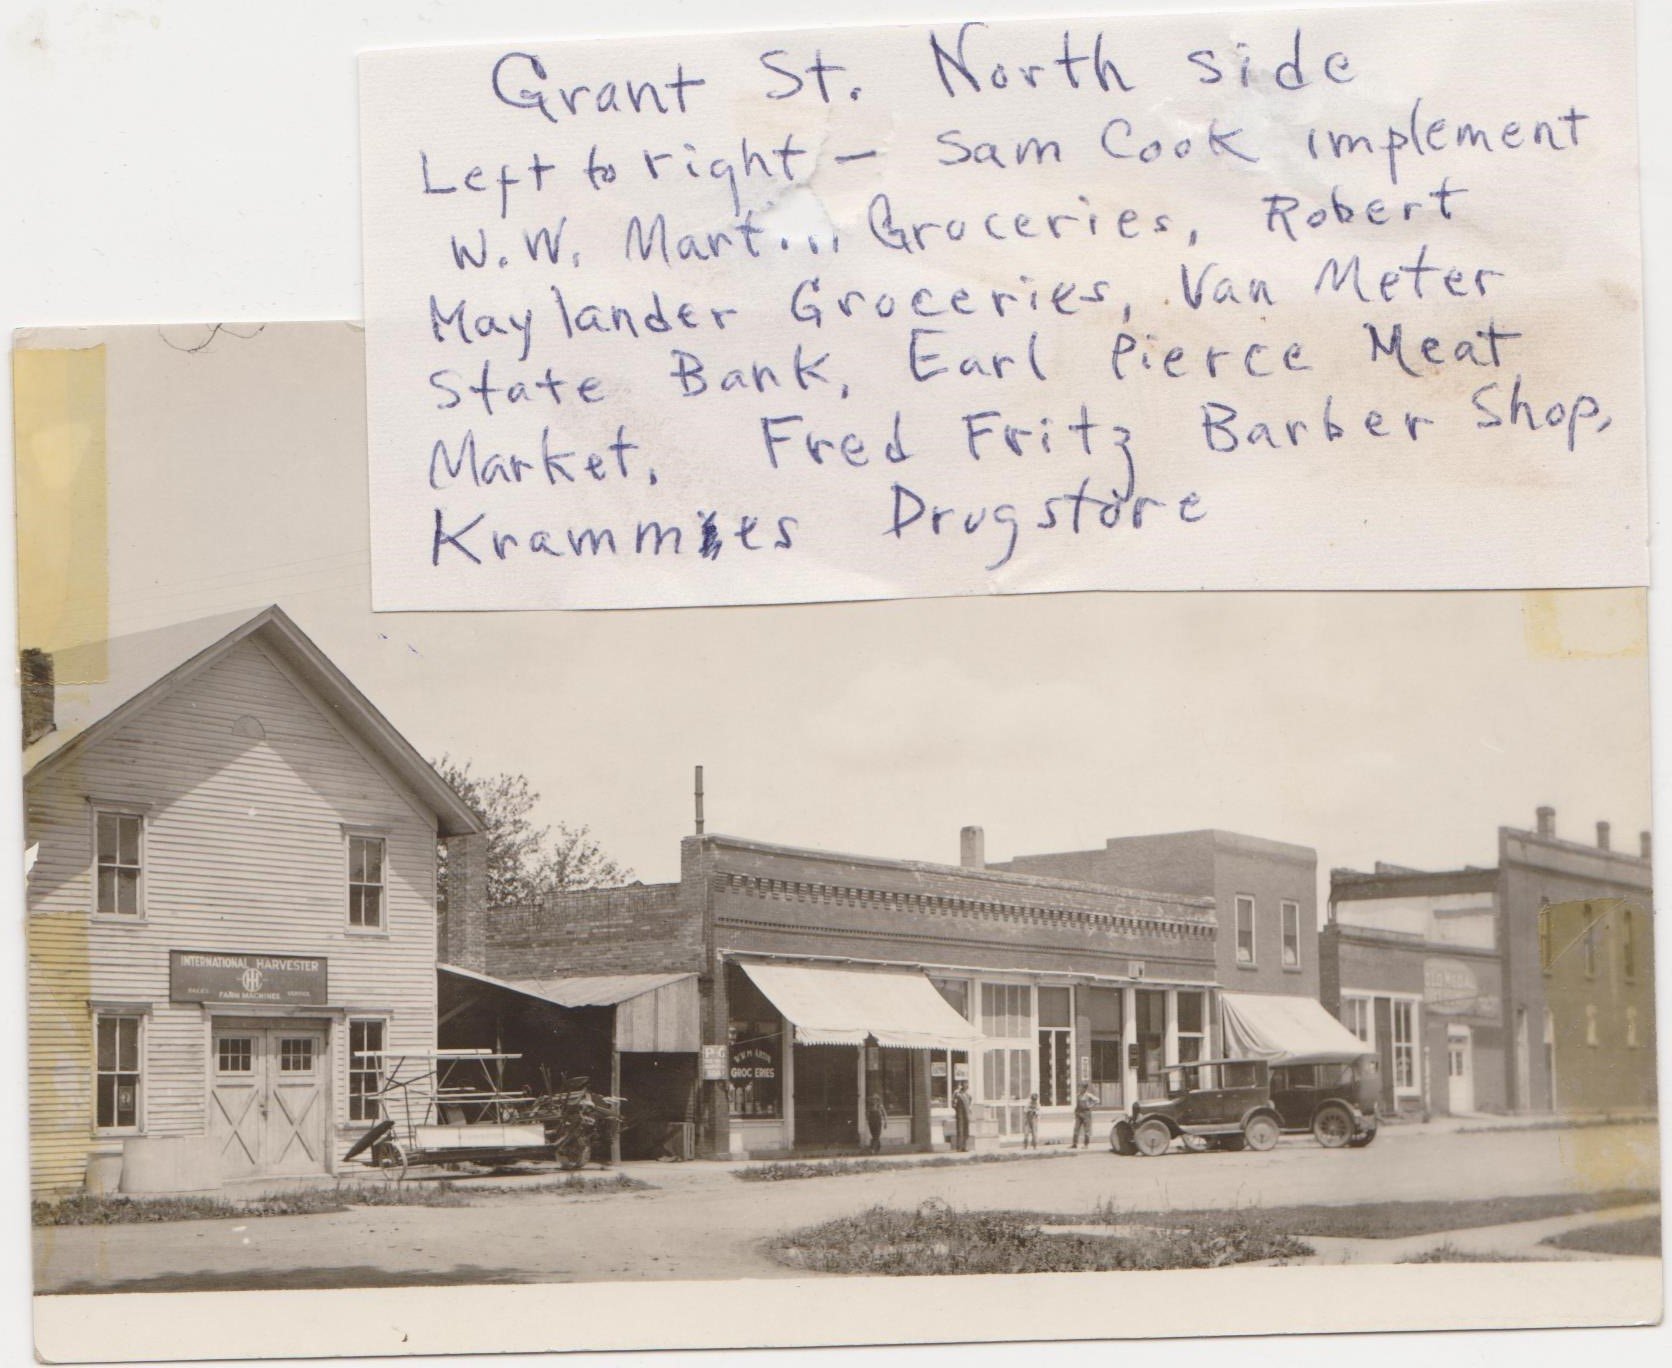 Grant-Street-North-Side-Left-to-Right.jpg